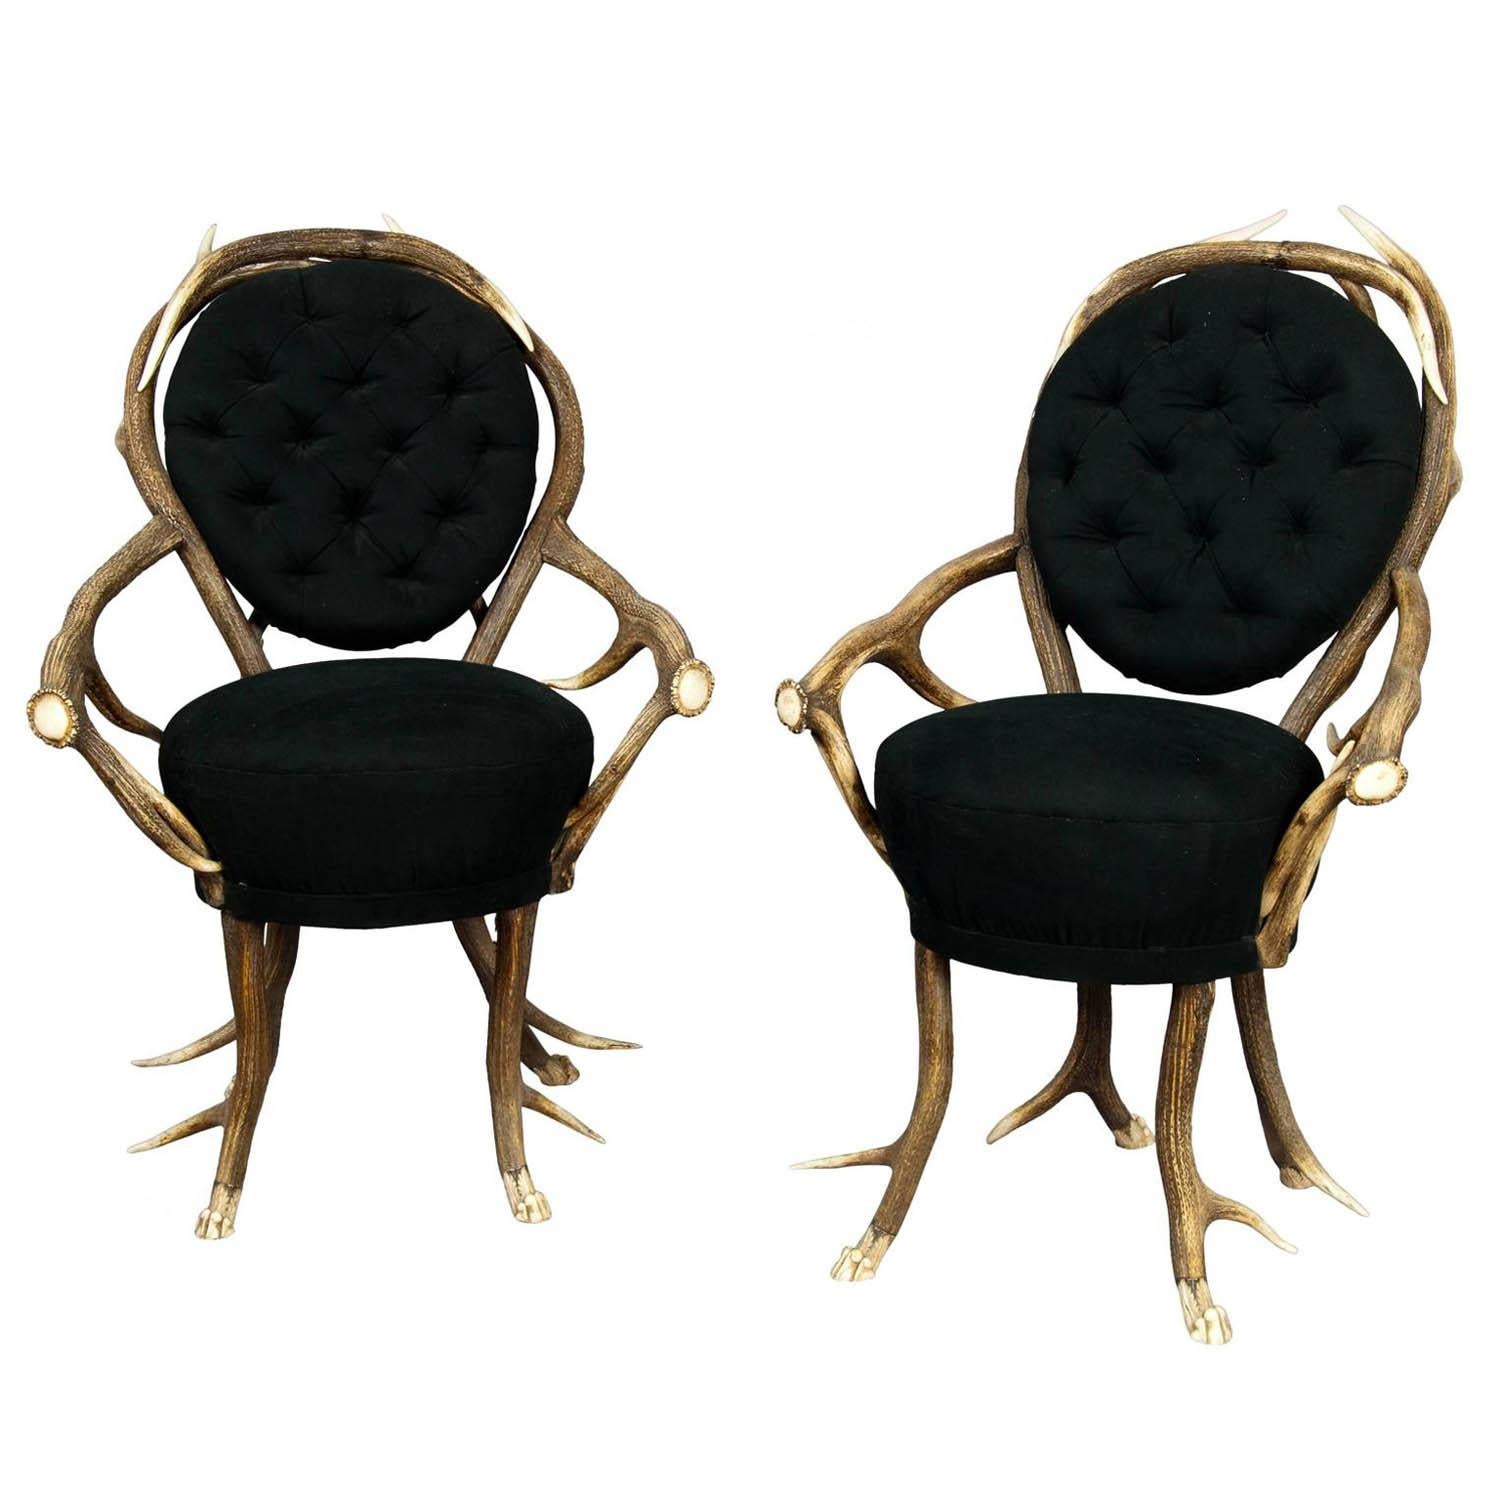 Pair of rare Antler Parlor chairs, French ca. 1860

The two very rare antler parlor chairs are made of stag antlers with feet carved as lions claws. French, ca. 1860 - covering renewed.

At the beginning of the 19th century the European nobility